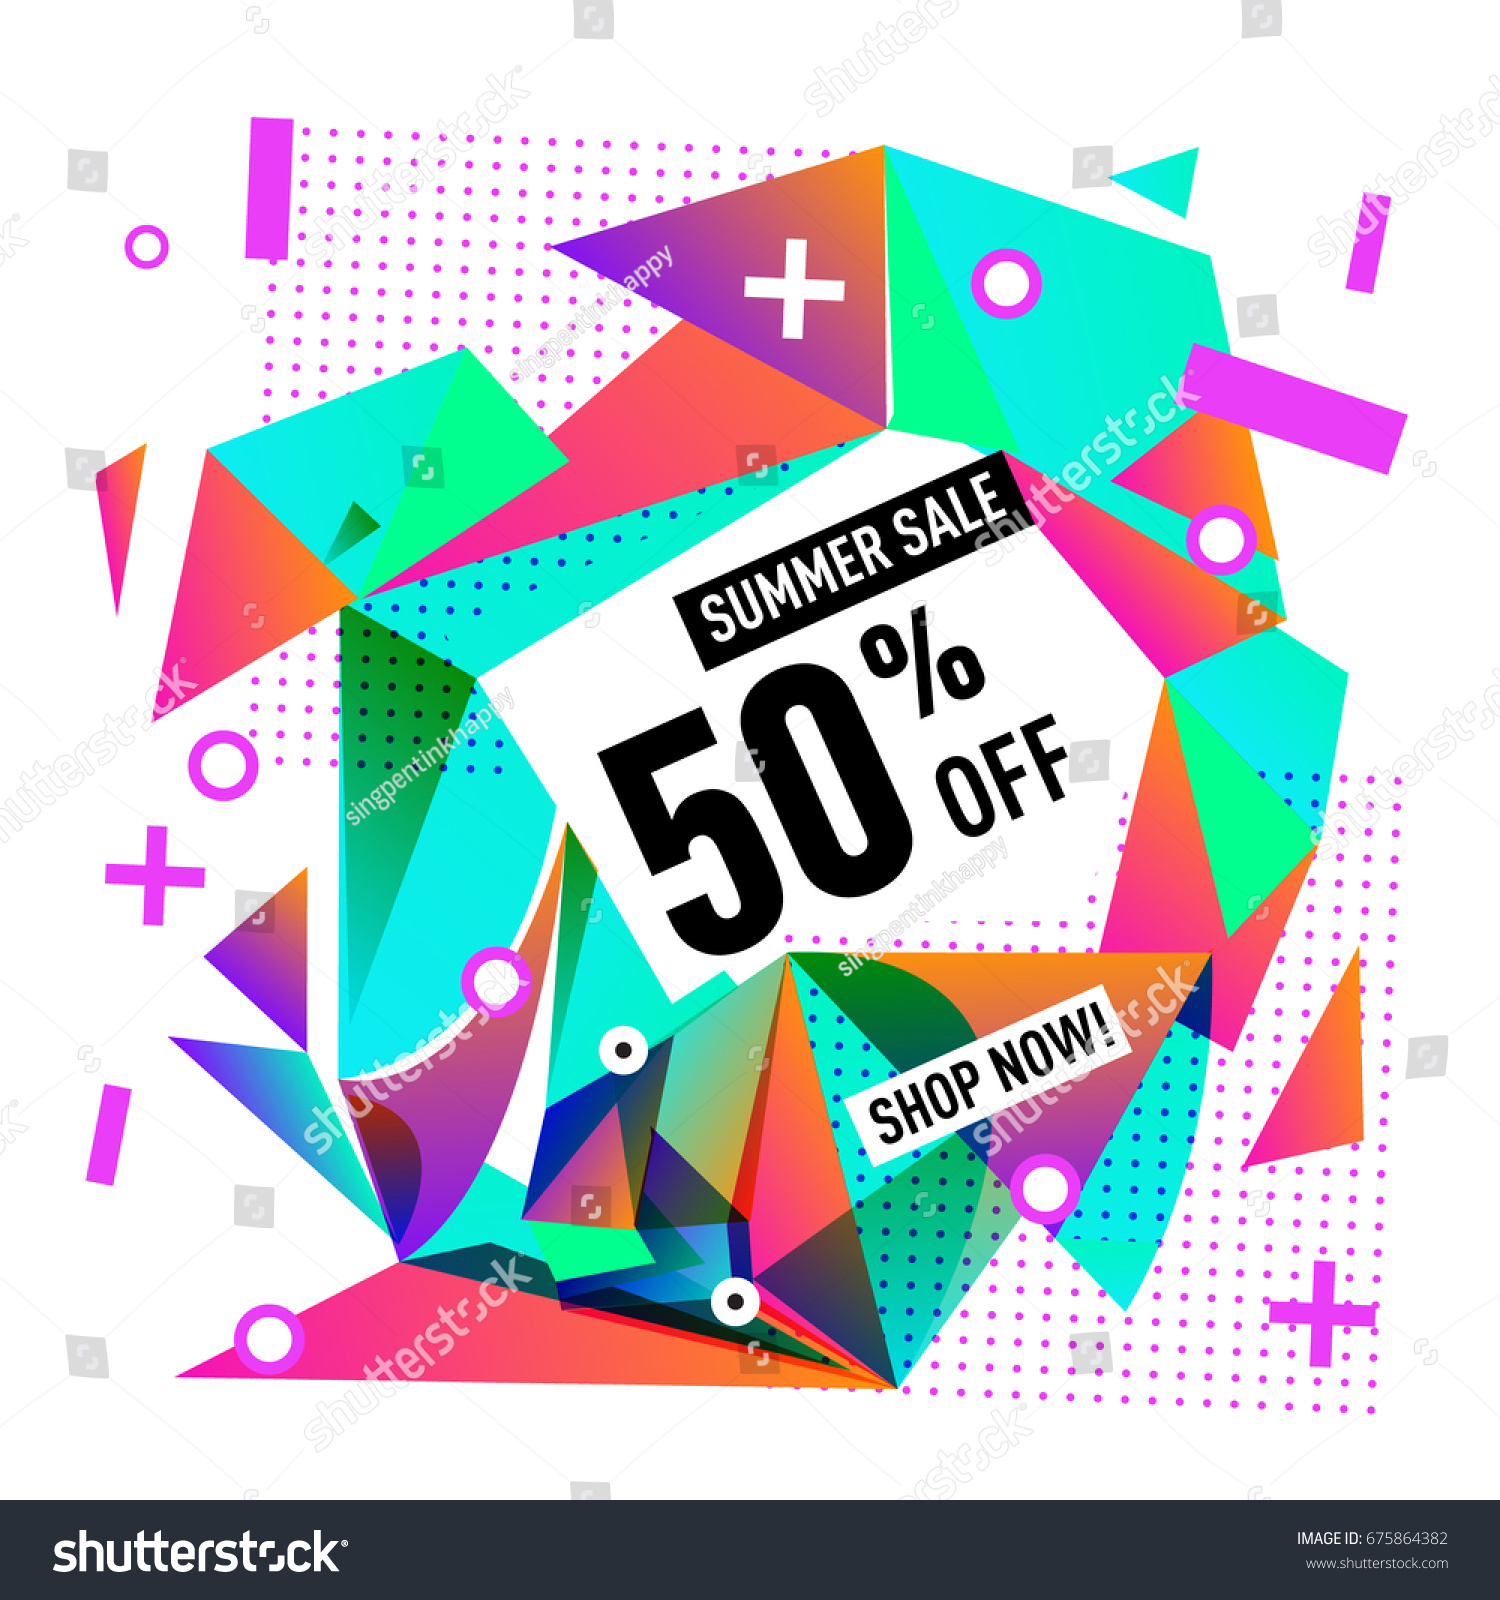 Summer sale geometric style web banner. Fashion and travel discount. Vector holiday Abstract colorful illustration with special offers and promotions. #675864382